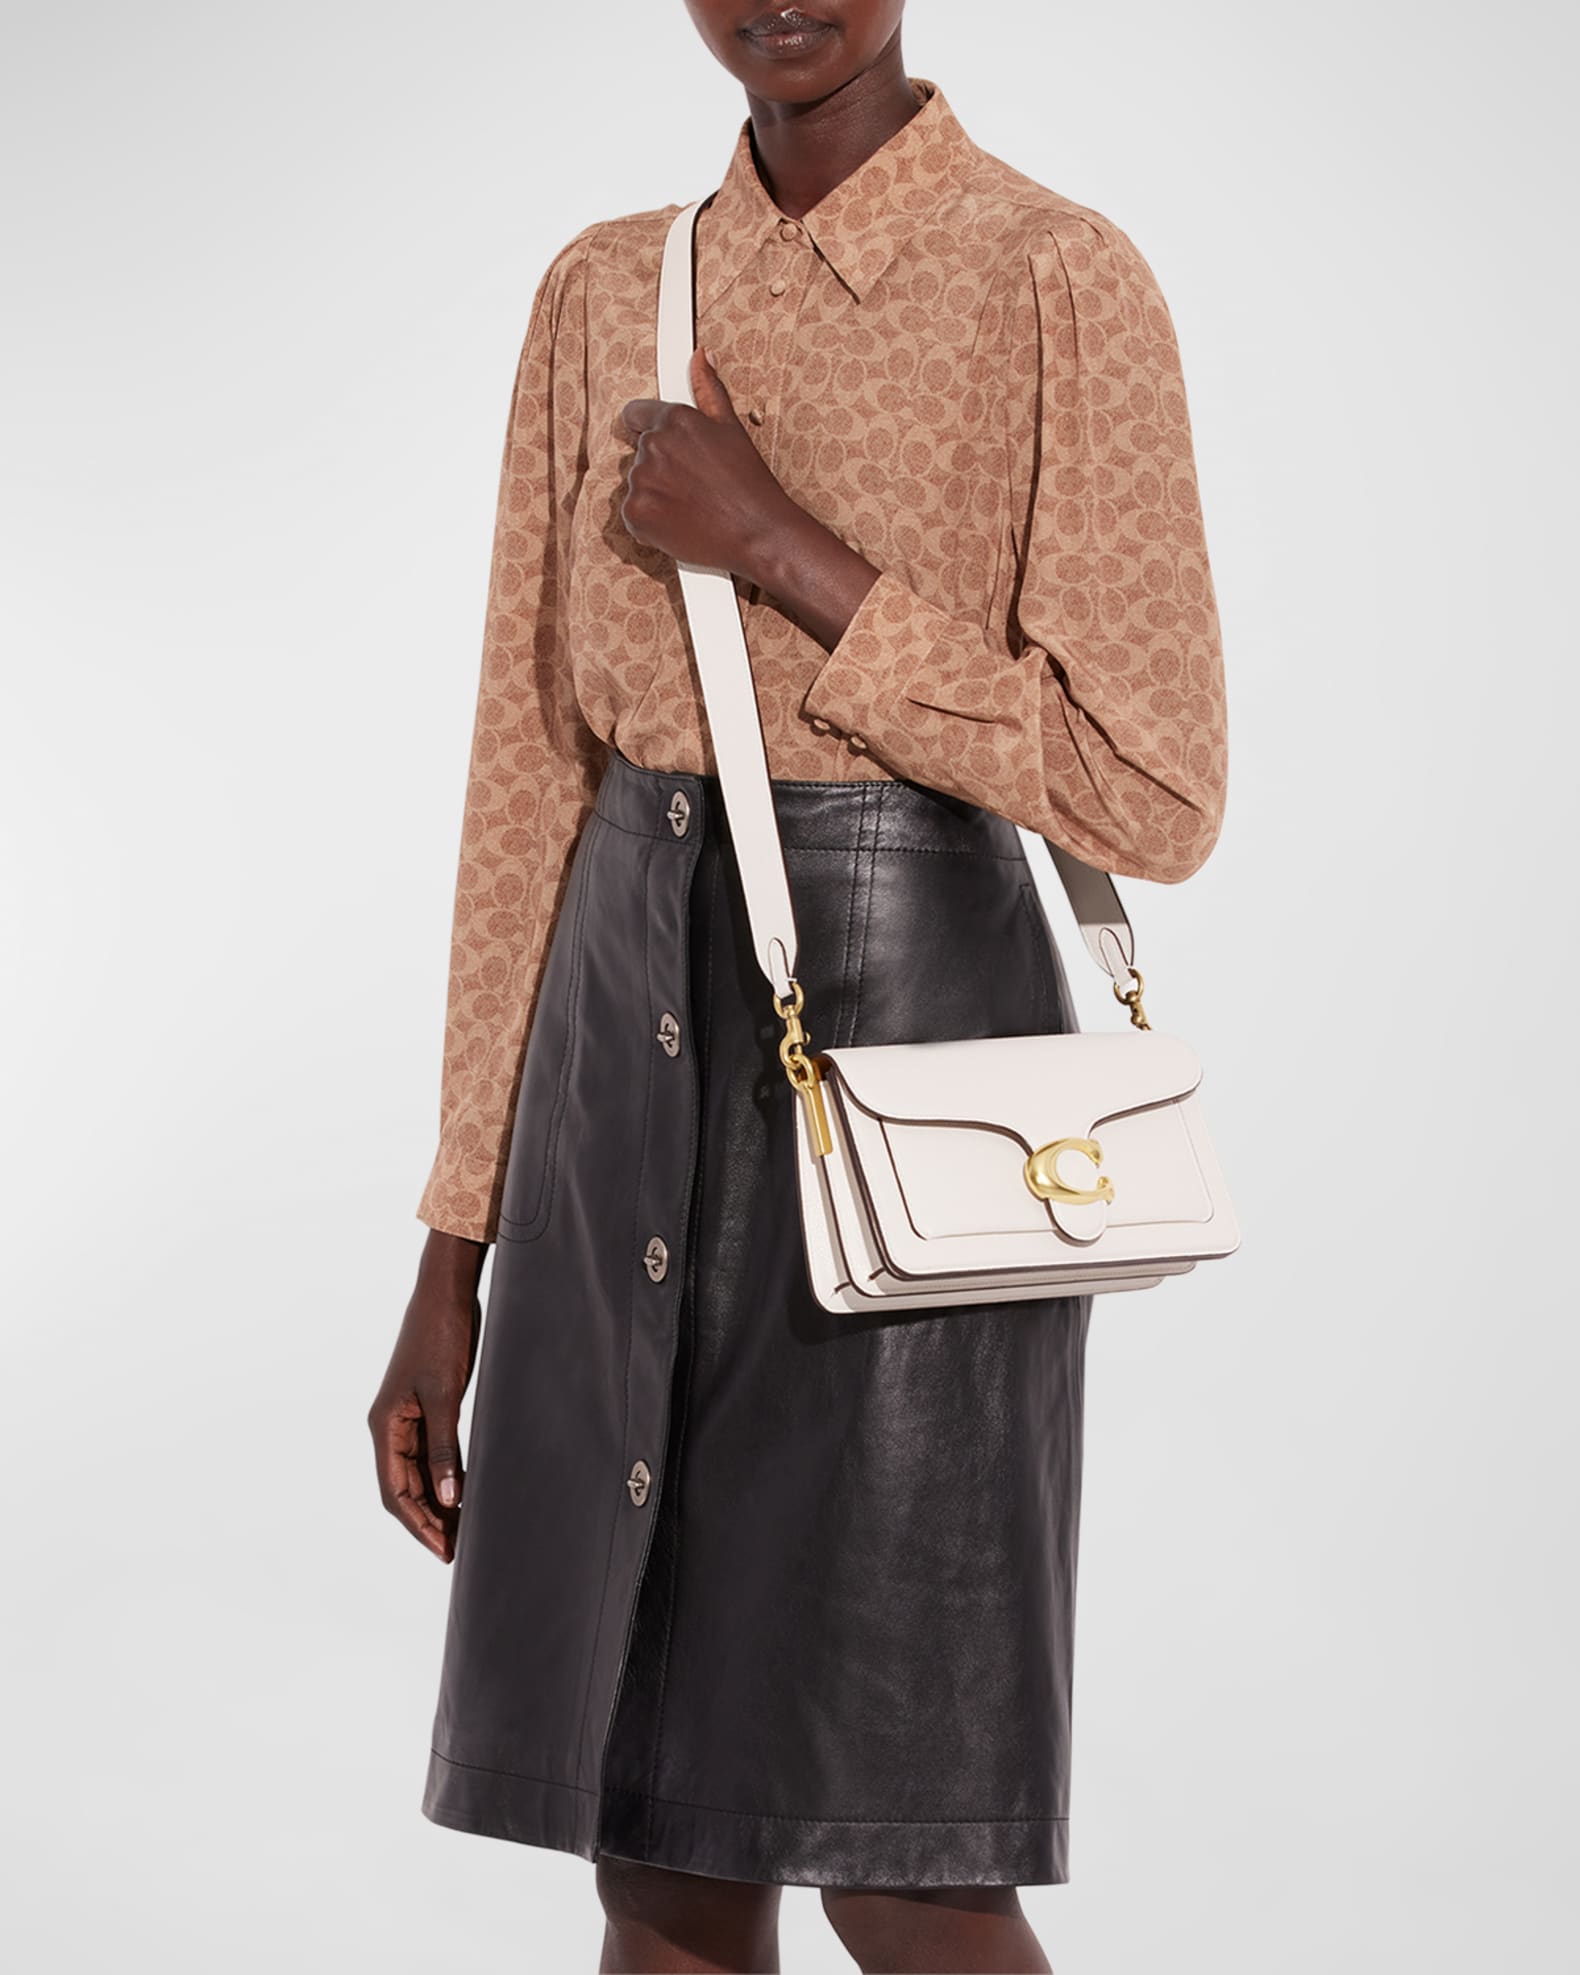 Coach Tabby Pebbled Leather Shoulder Bag | Neiman Marcus